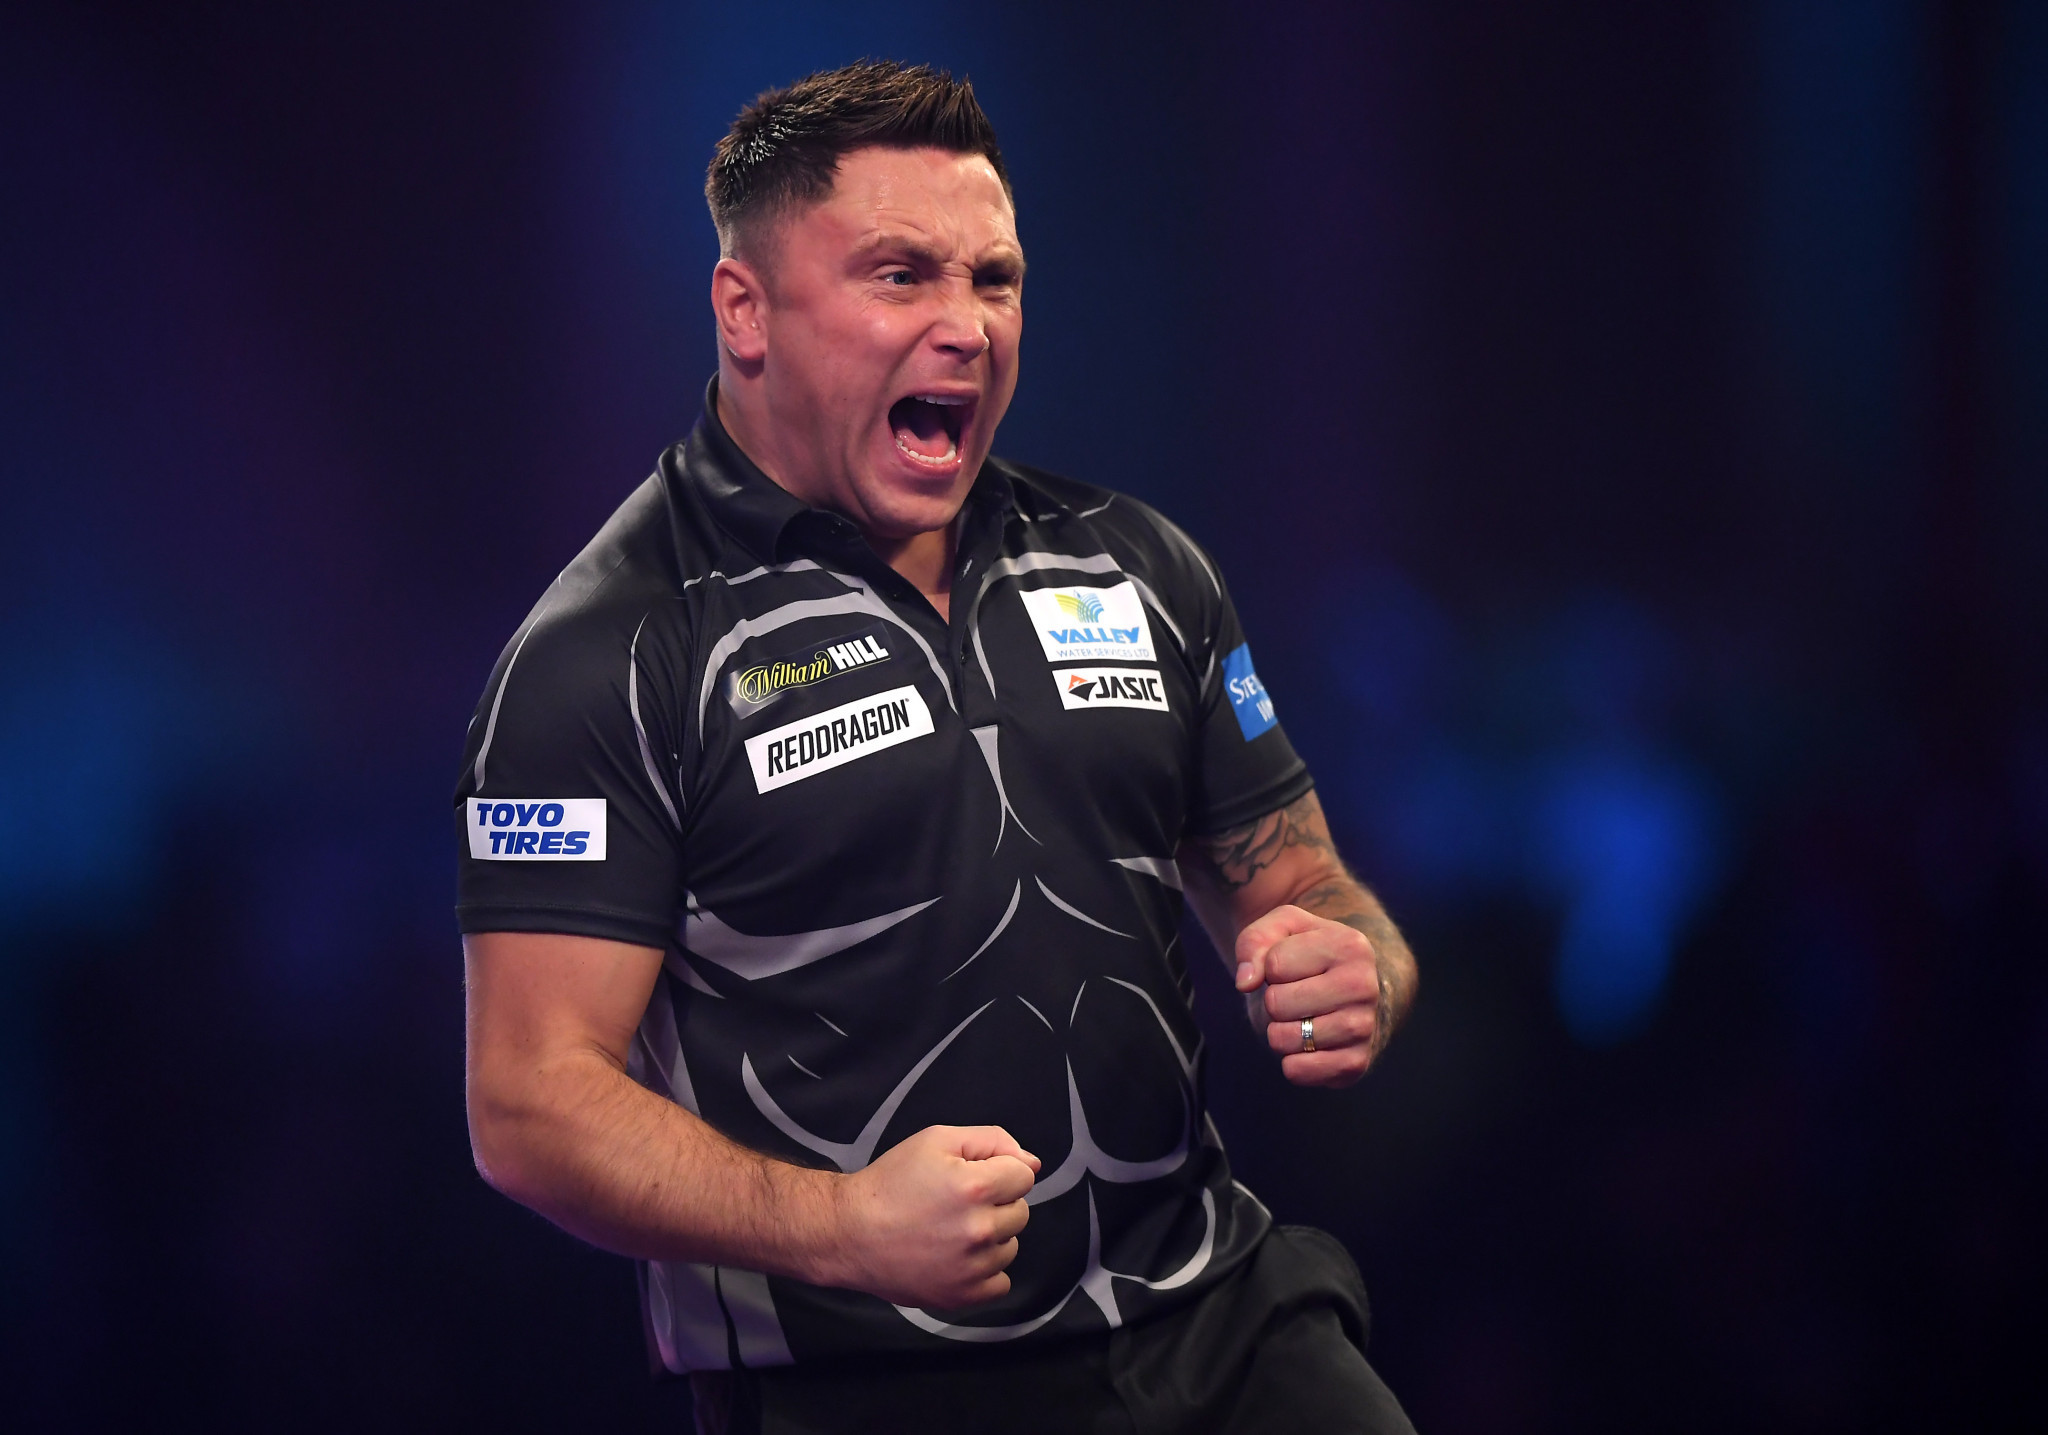 Gerwyn Price switched from rugby to become a professional darts player ©Getty Images